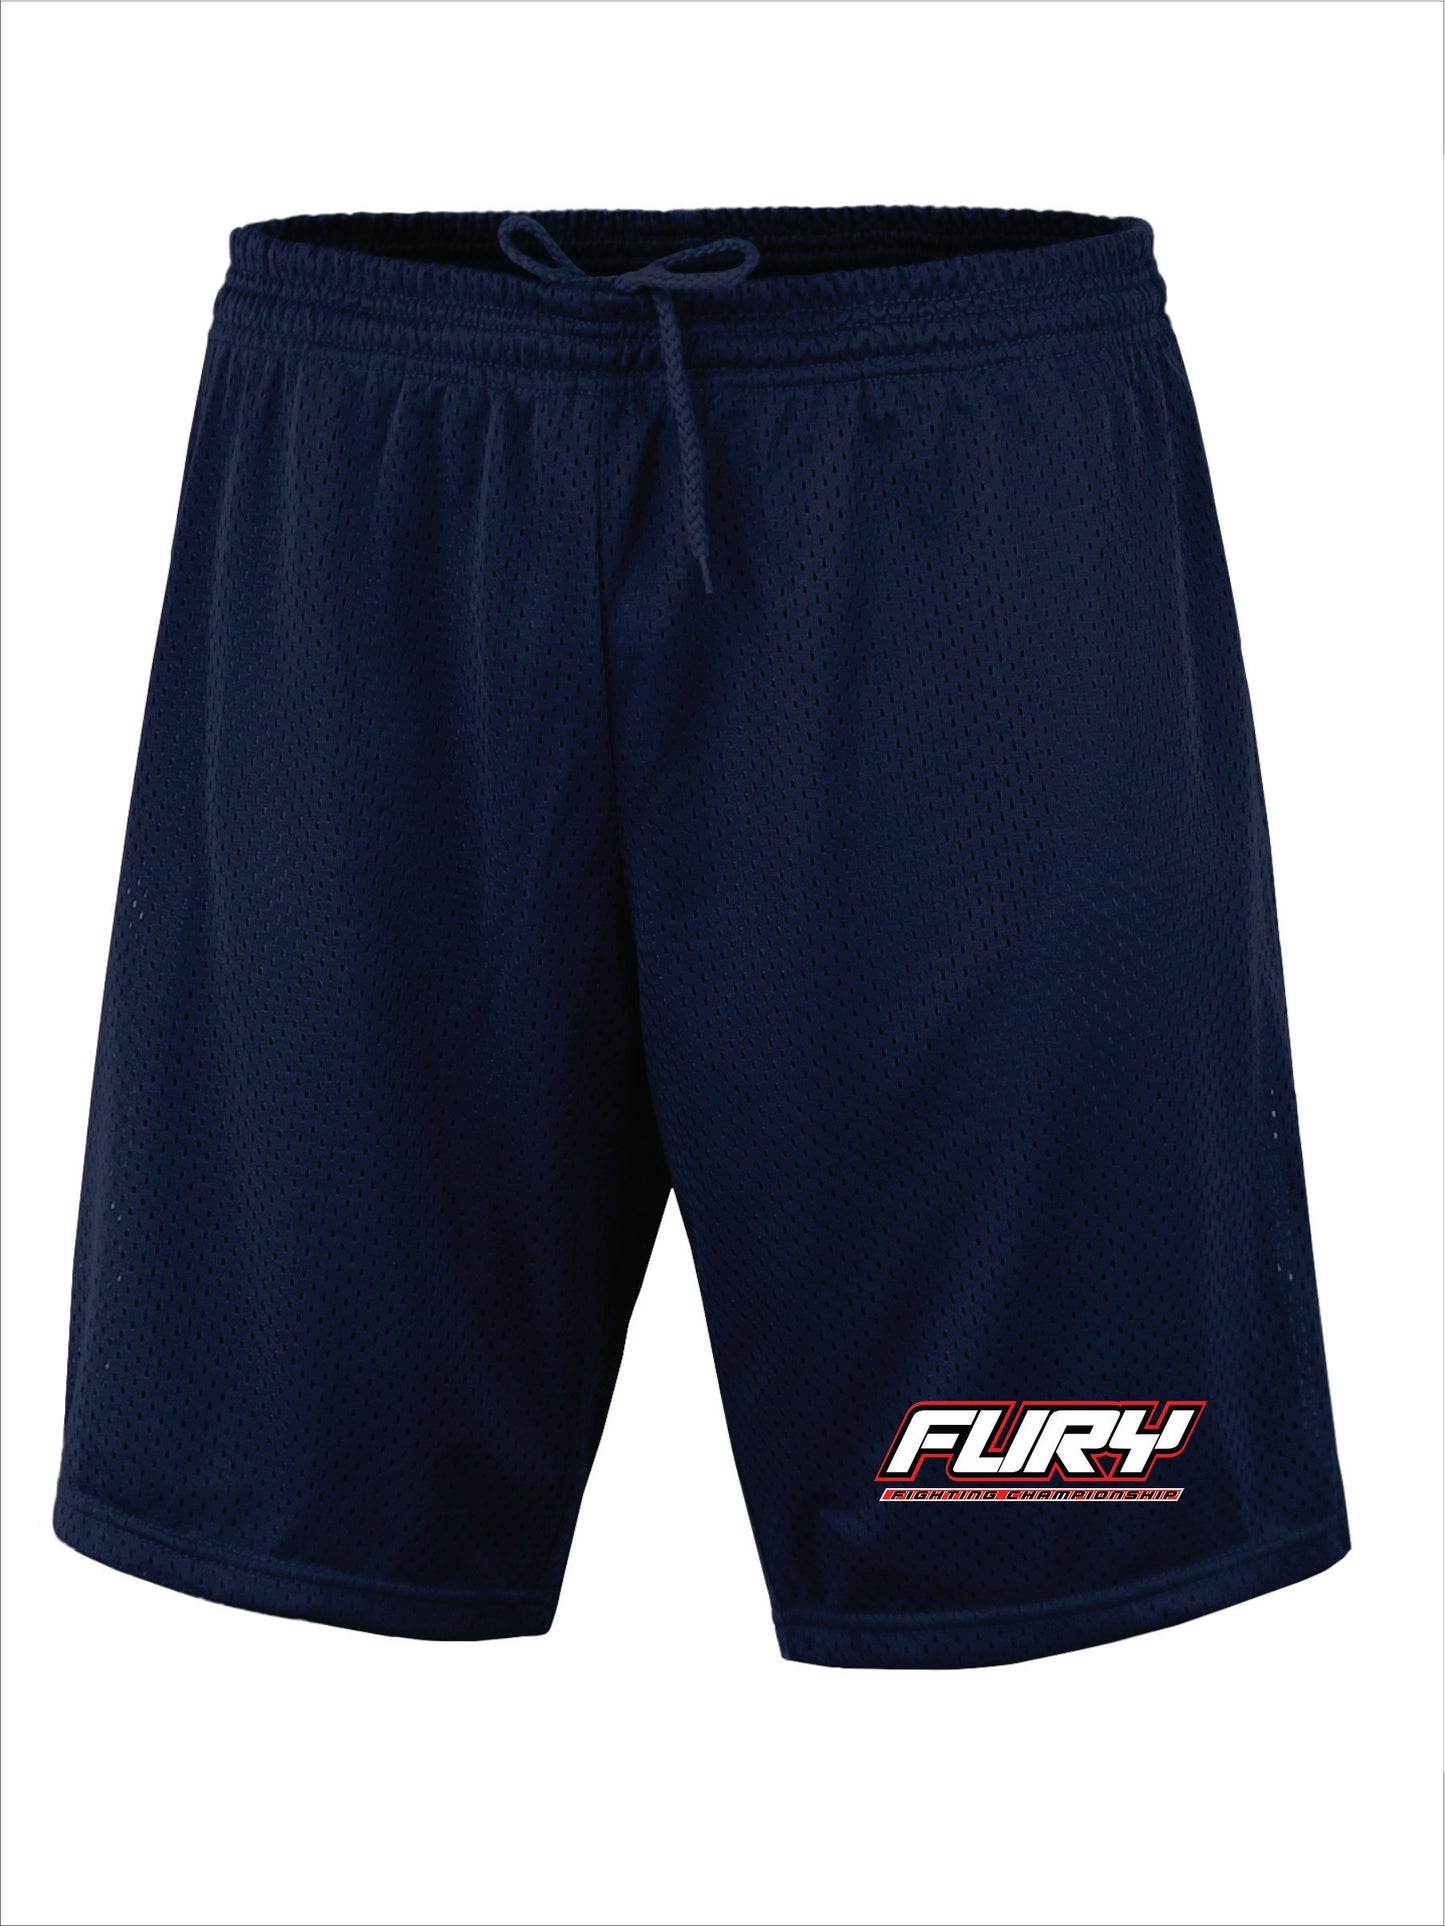 Fury Embroidered Mesh Shorts